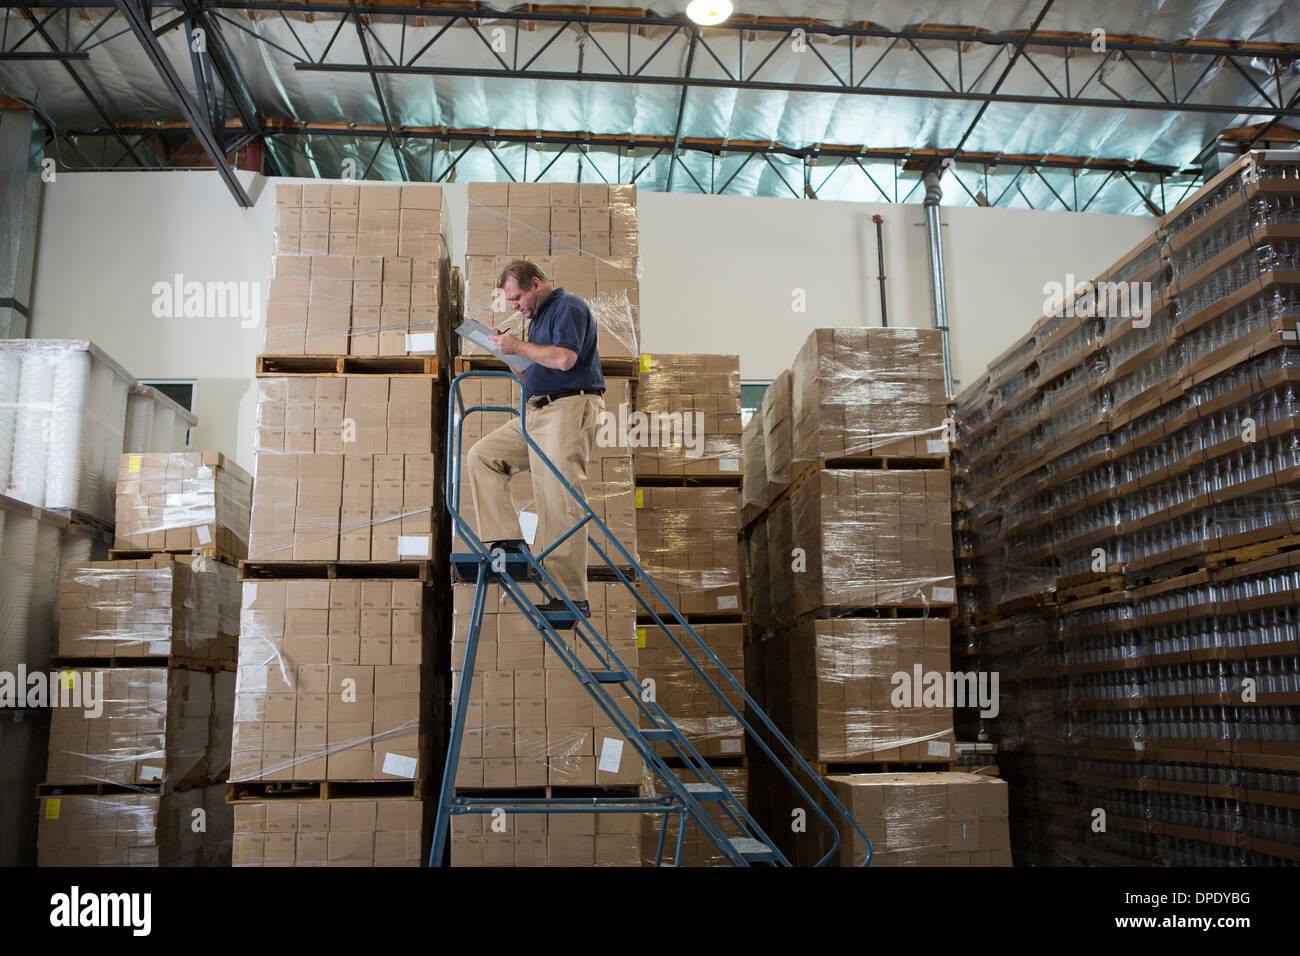 Man on ladders in warehouse with cardboard boxes Stock Photo